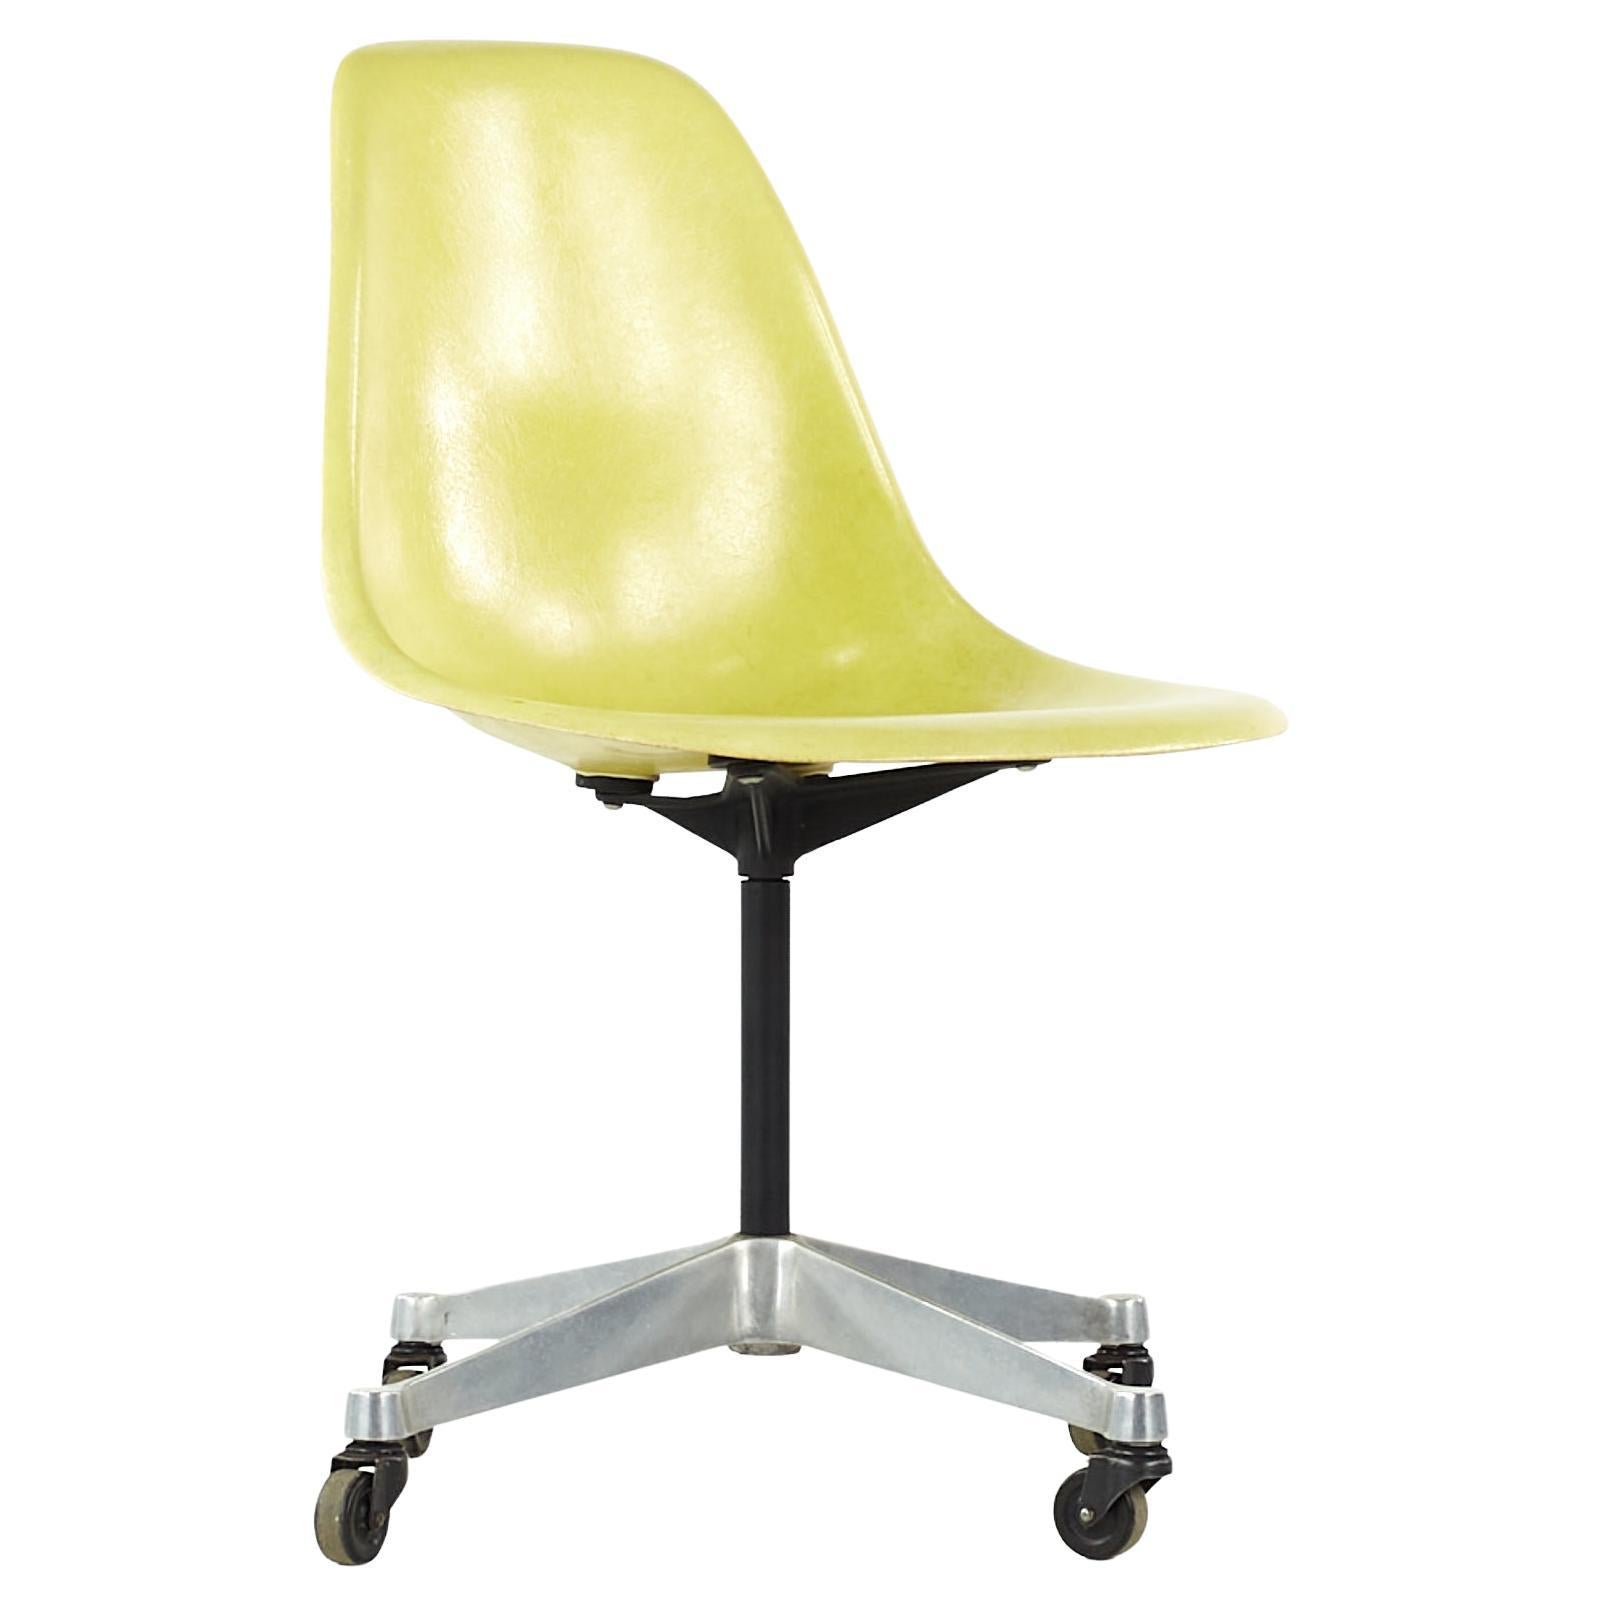 Charles and Ray Eames for Herman Miller MCM Fiberglass Wheeled Shell Chair